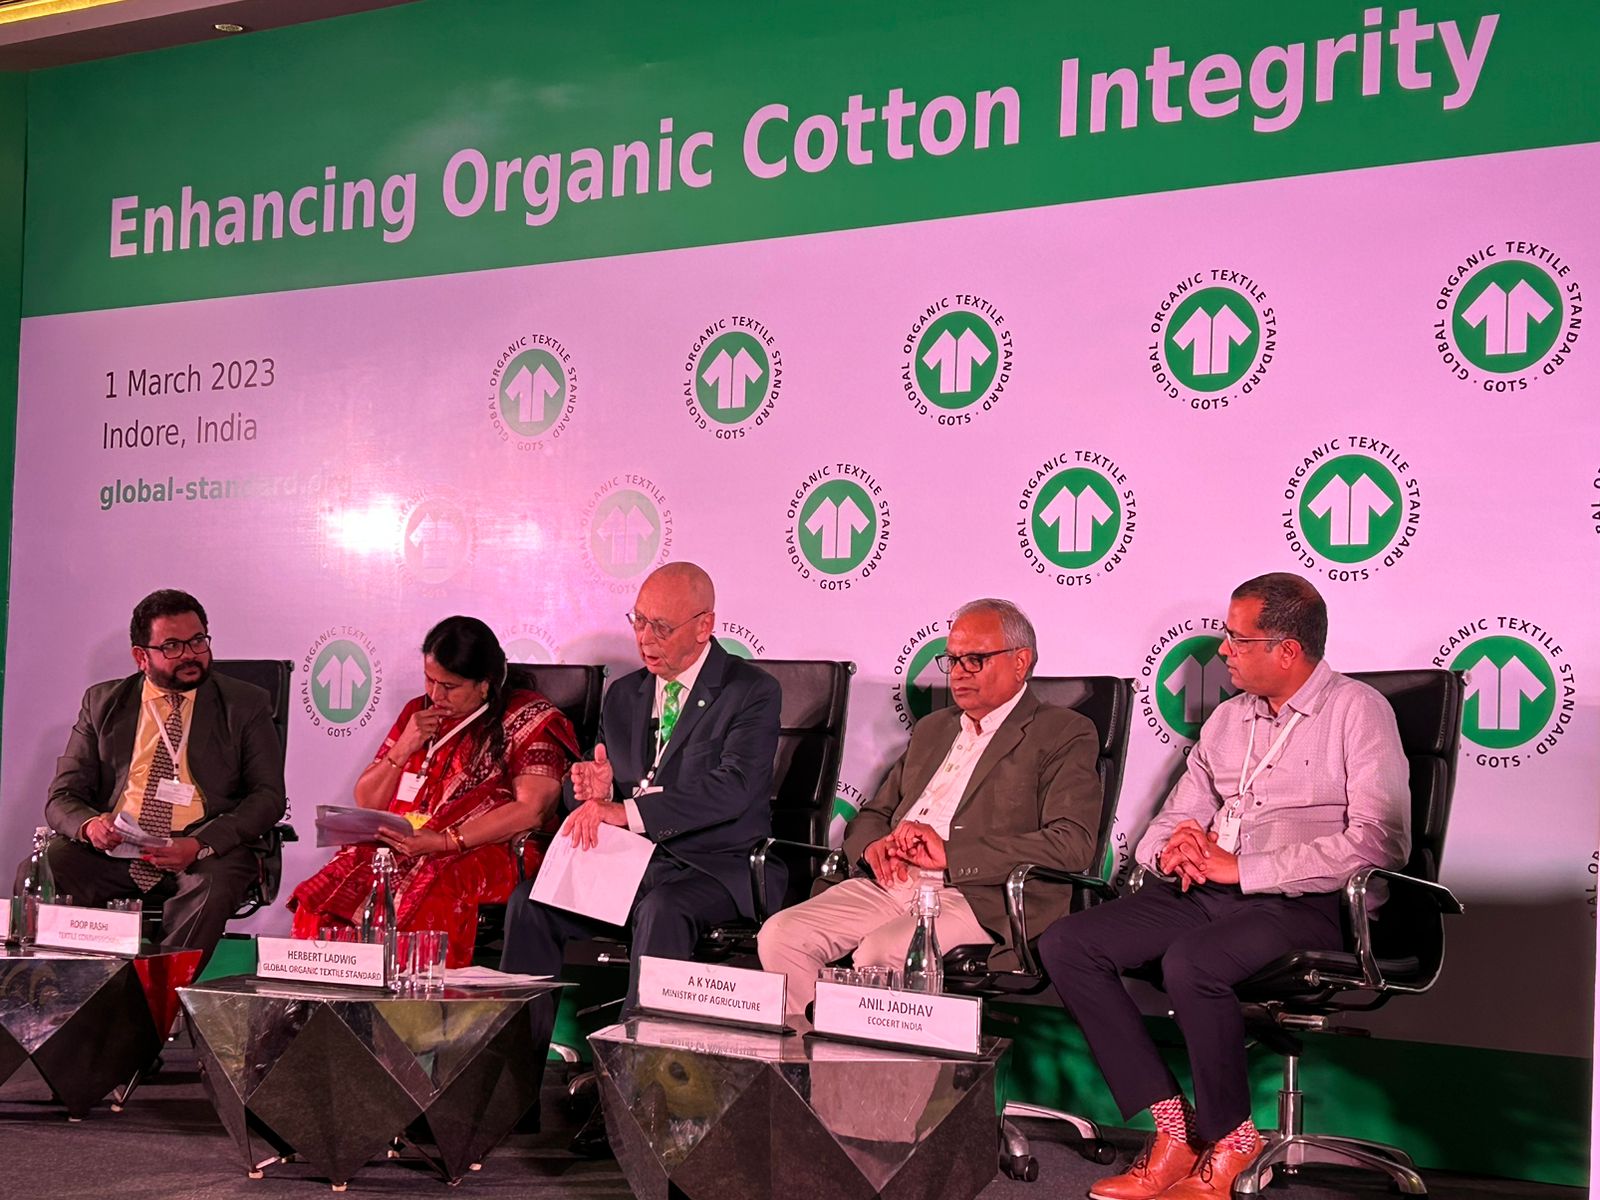 Shri Rajesh Satam, Joint Director, TEXPROCIL in Panel Discussion @Organic Cotton Conference organised by GOTS at Indore Marriott Hotel on March 1, 2023